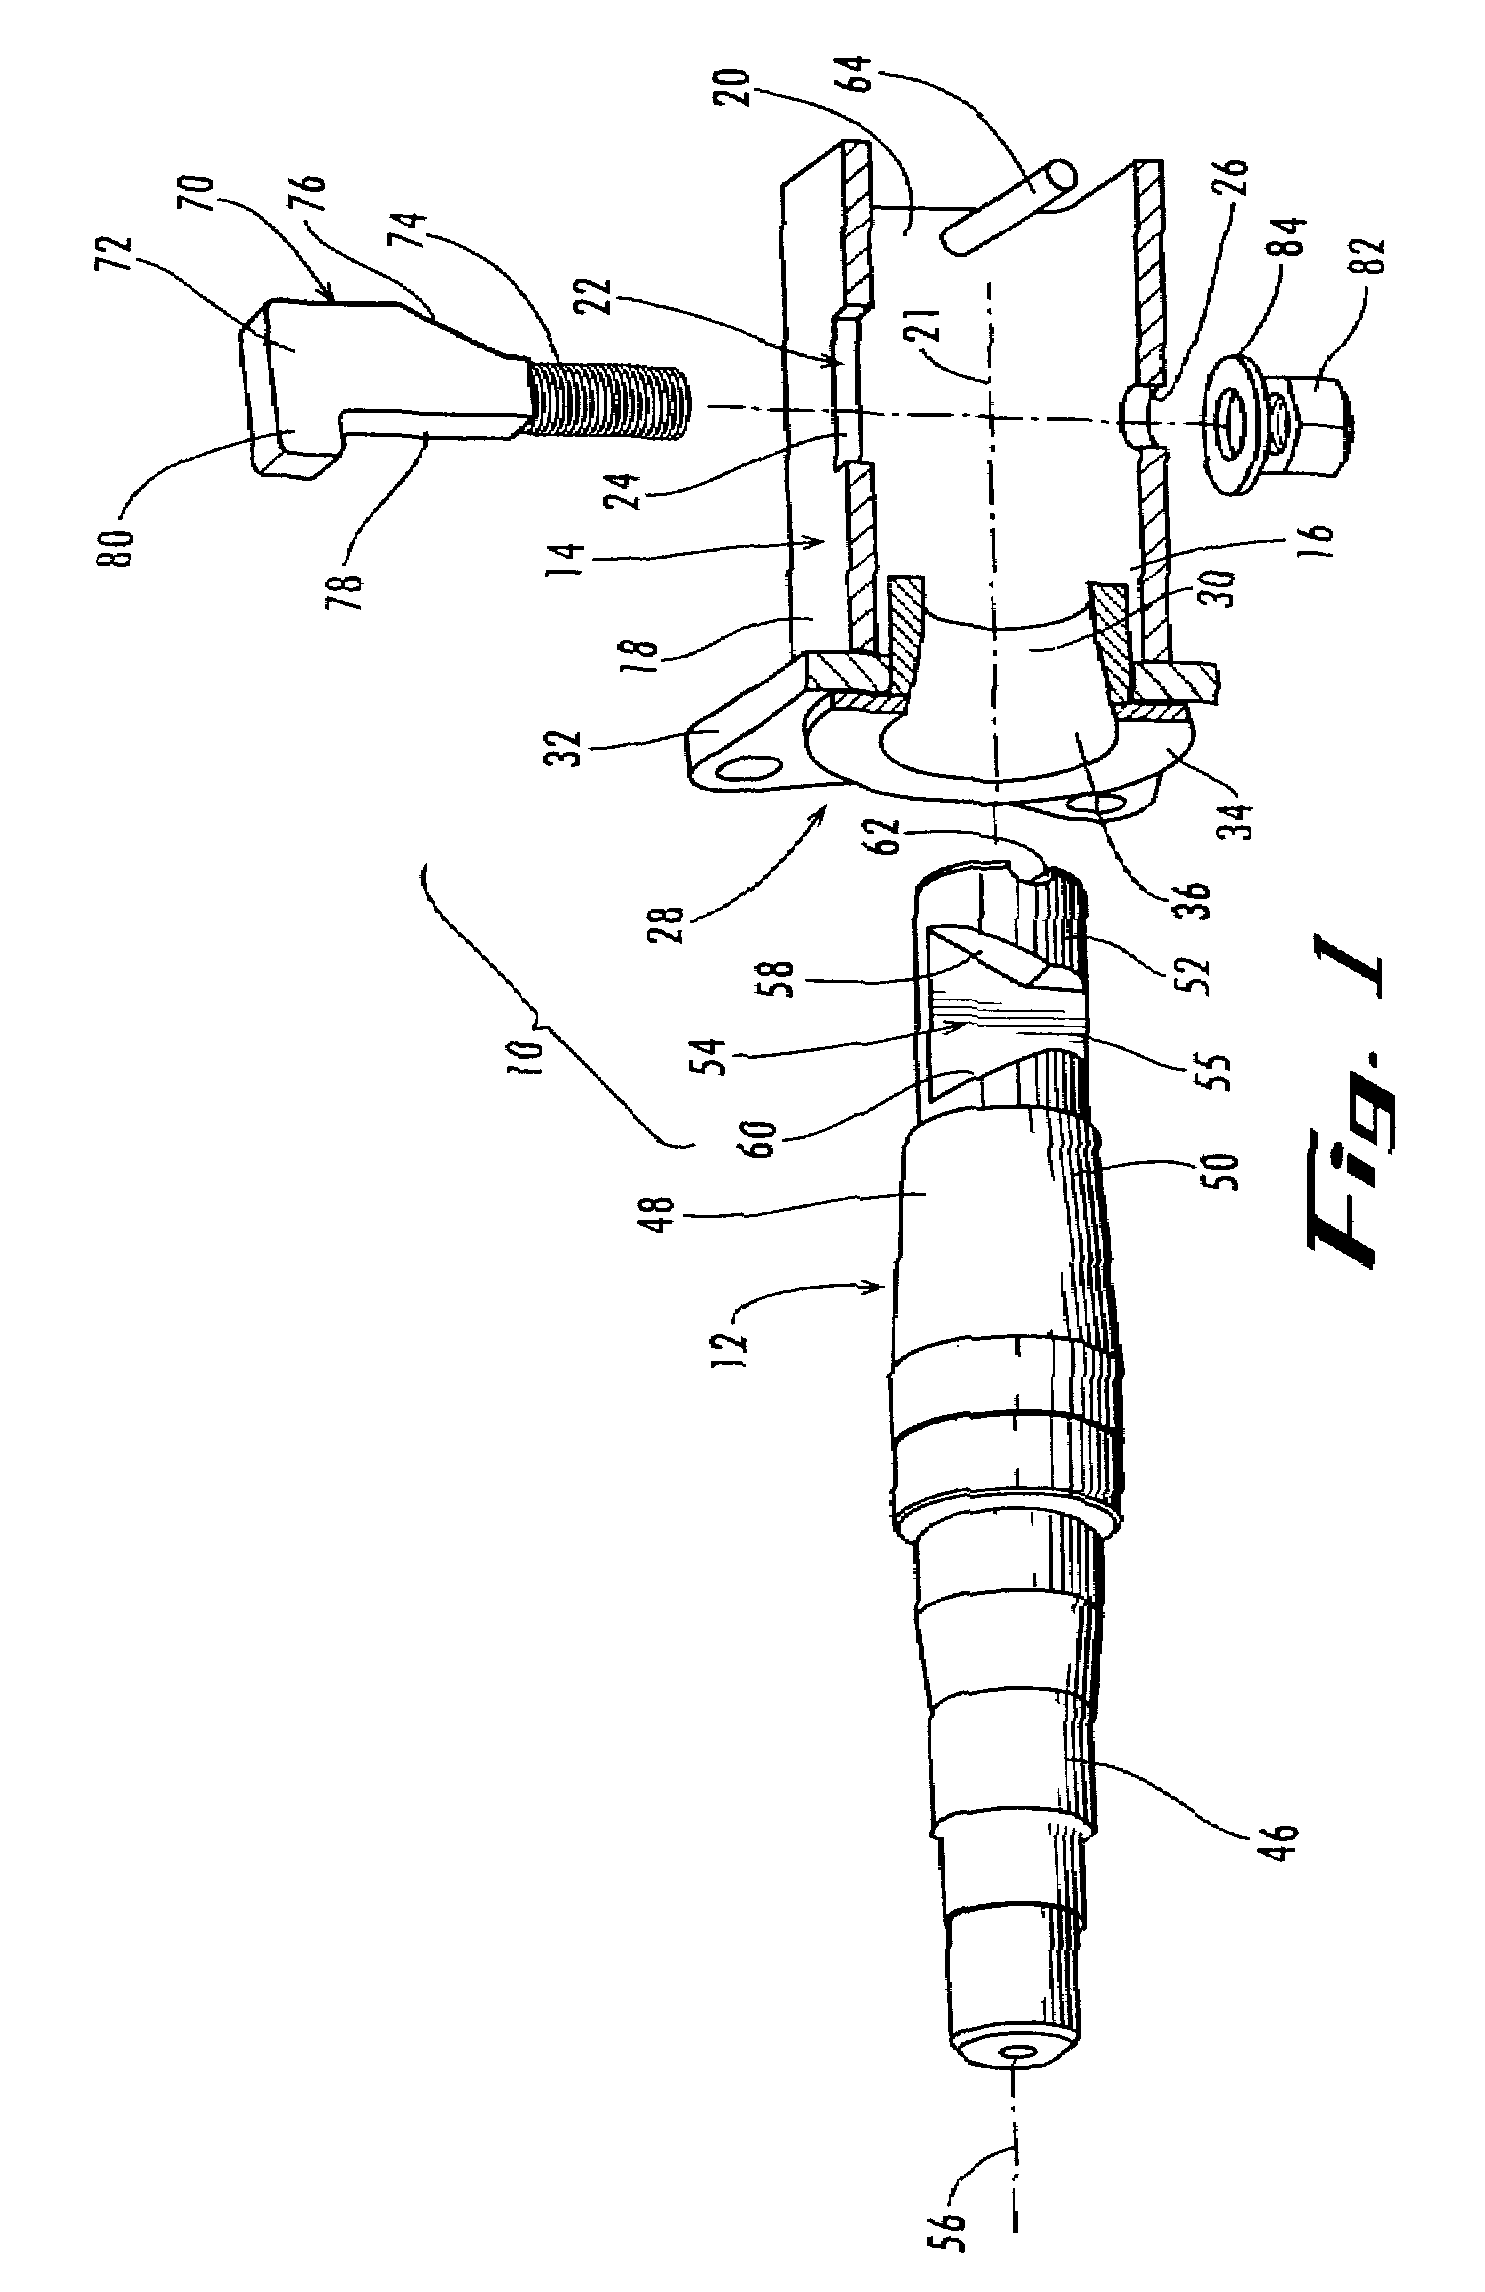 Axle with removable spindle and cam key